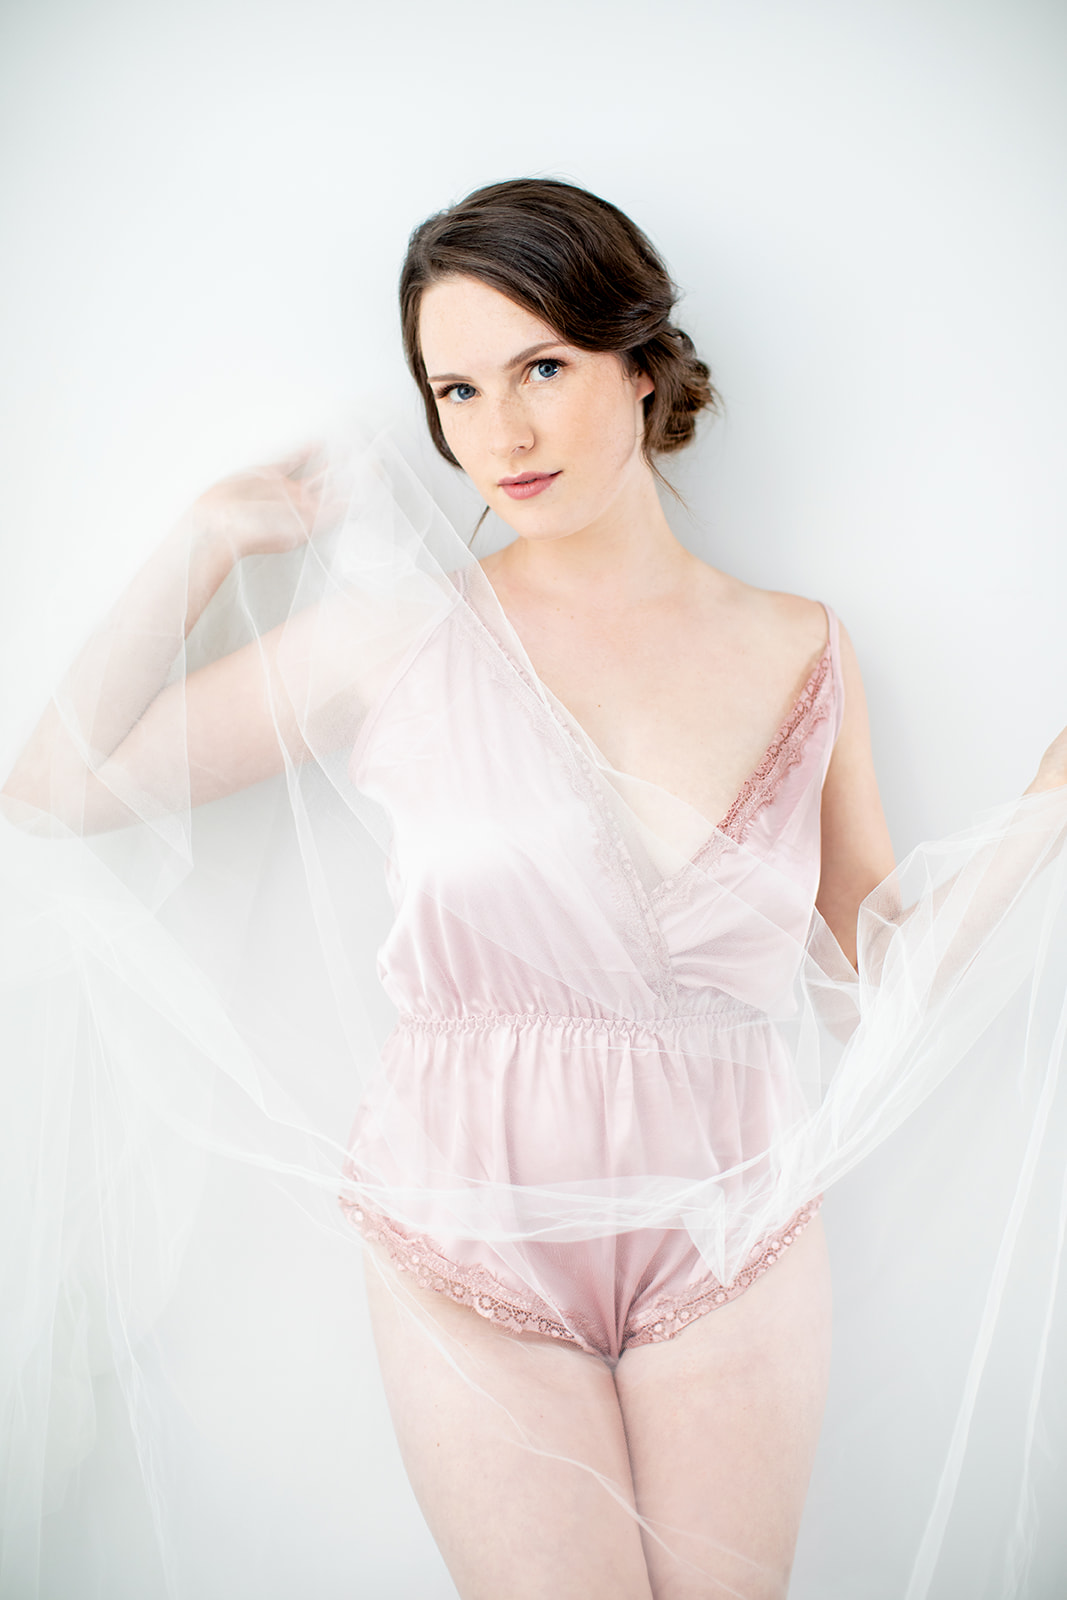 Classic and Timeless Boudoir Photo Shoot - Image Property of www.j-dphoto.com